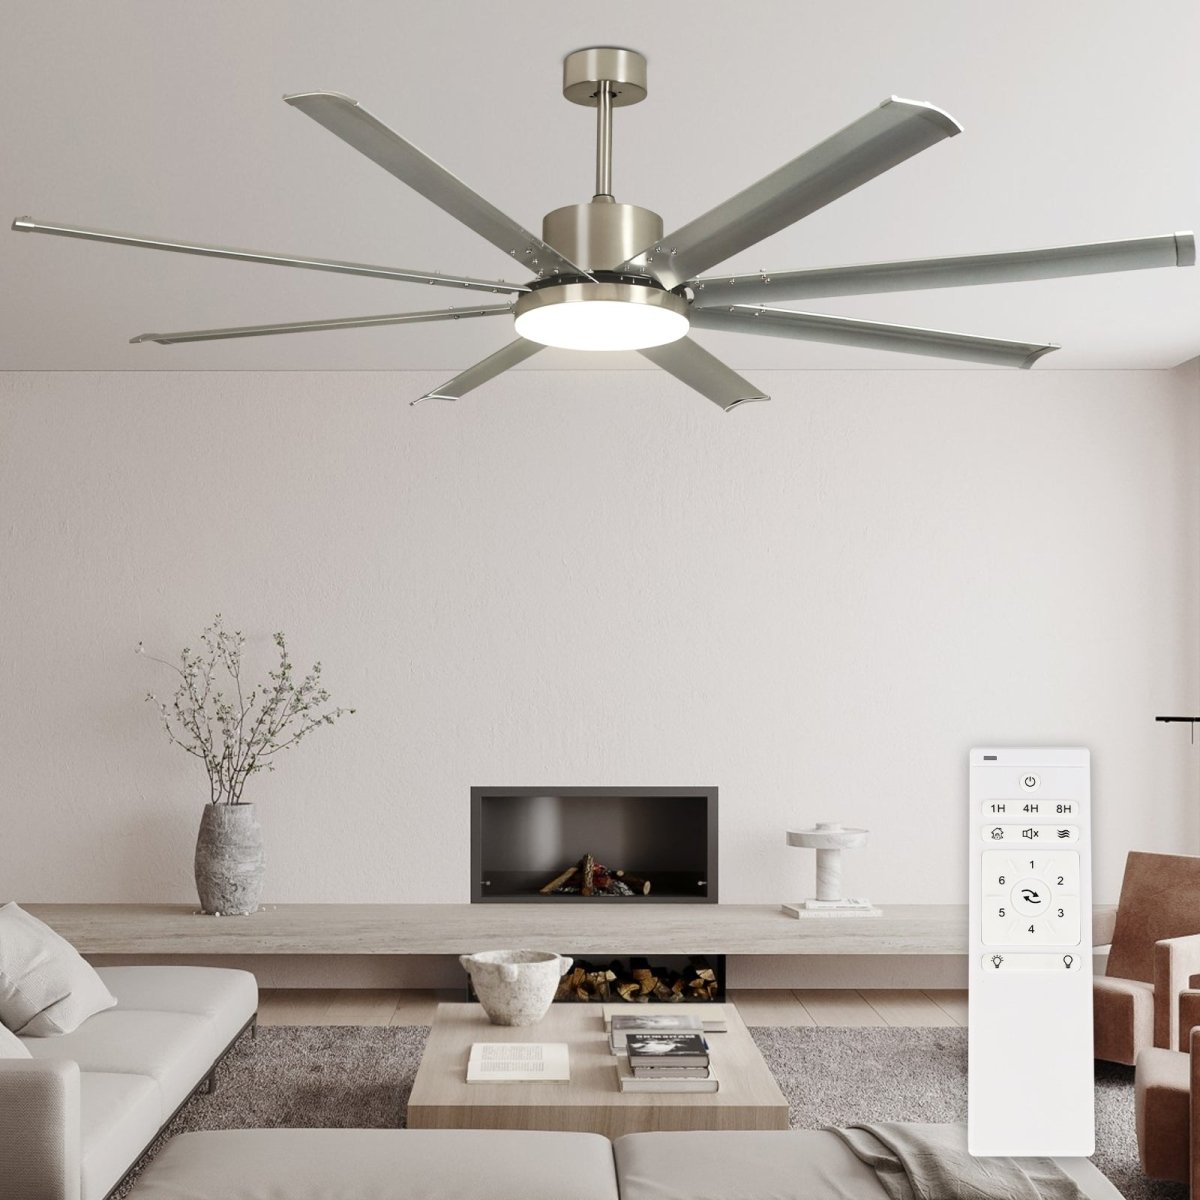 80" Ceiling Fans with Lights and Remote, 8 Aluminum Blades Sand Nickel & Silver Ceiling Fans, 6-Speed DC Motor, Farmhouse Ceiling Fan with Light for Kitchen Living Room Bedroom Farmhouse - WS-FPZ58-24C-8-NS 2 | DEPULEY